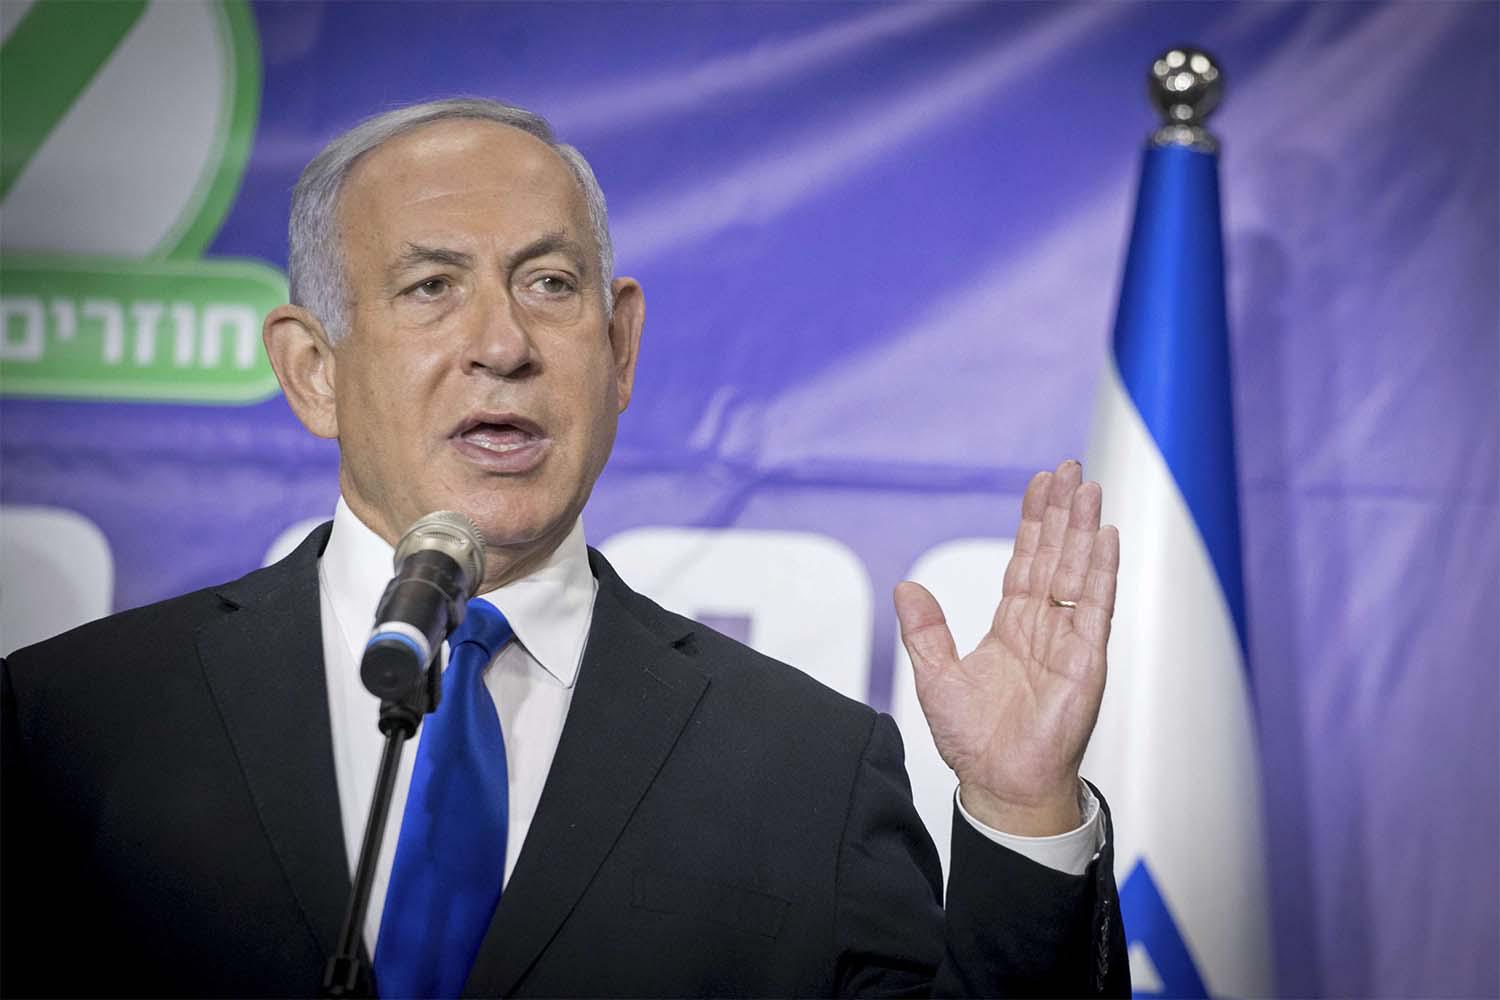 Netanyahu has made his drive to forge new relations in the Gulf region a centrepiece of his campaign